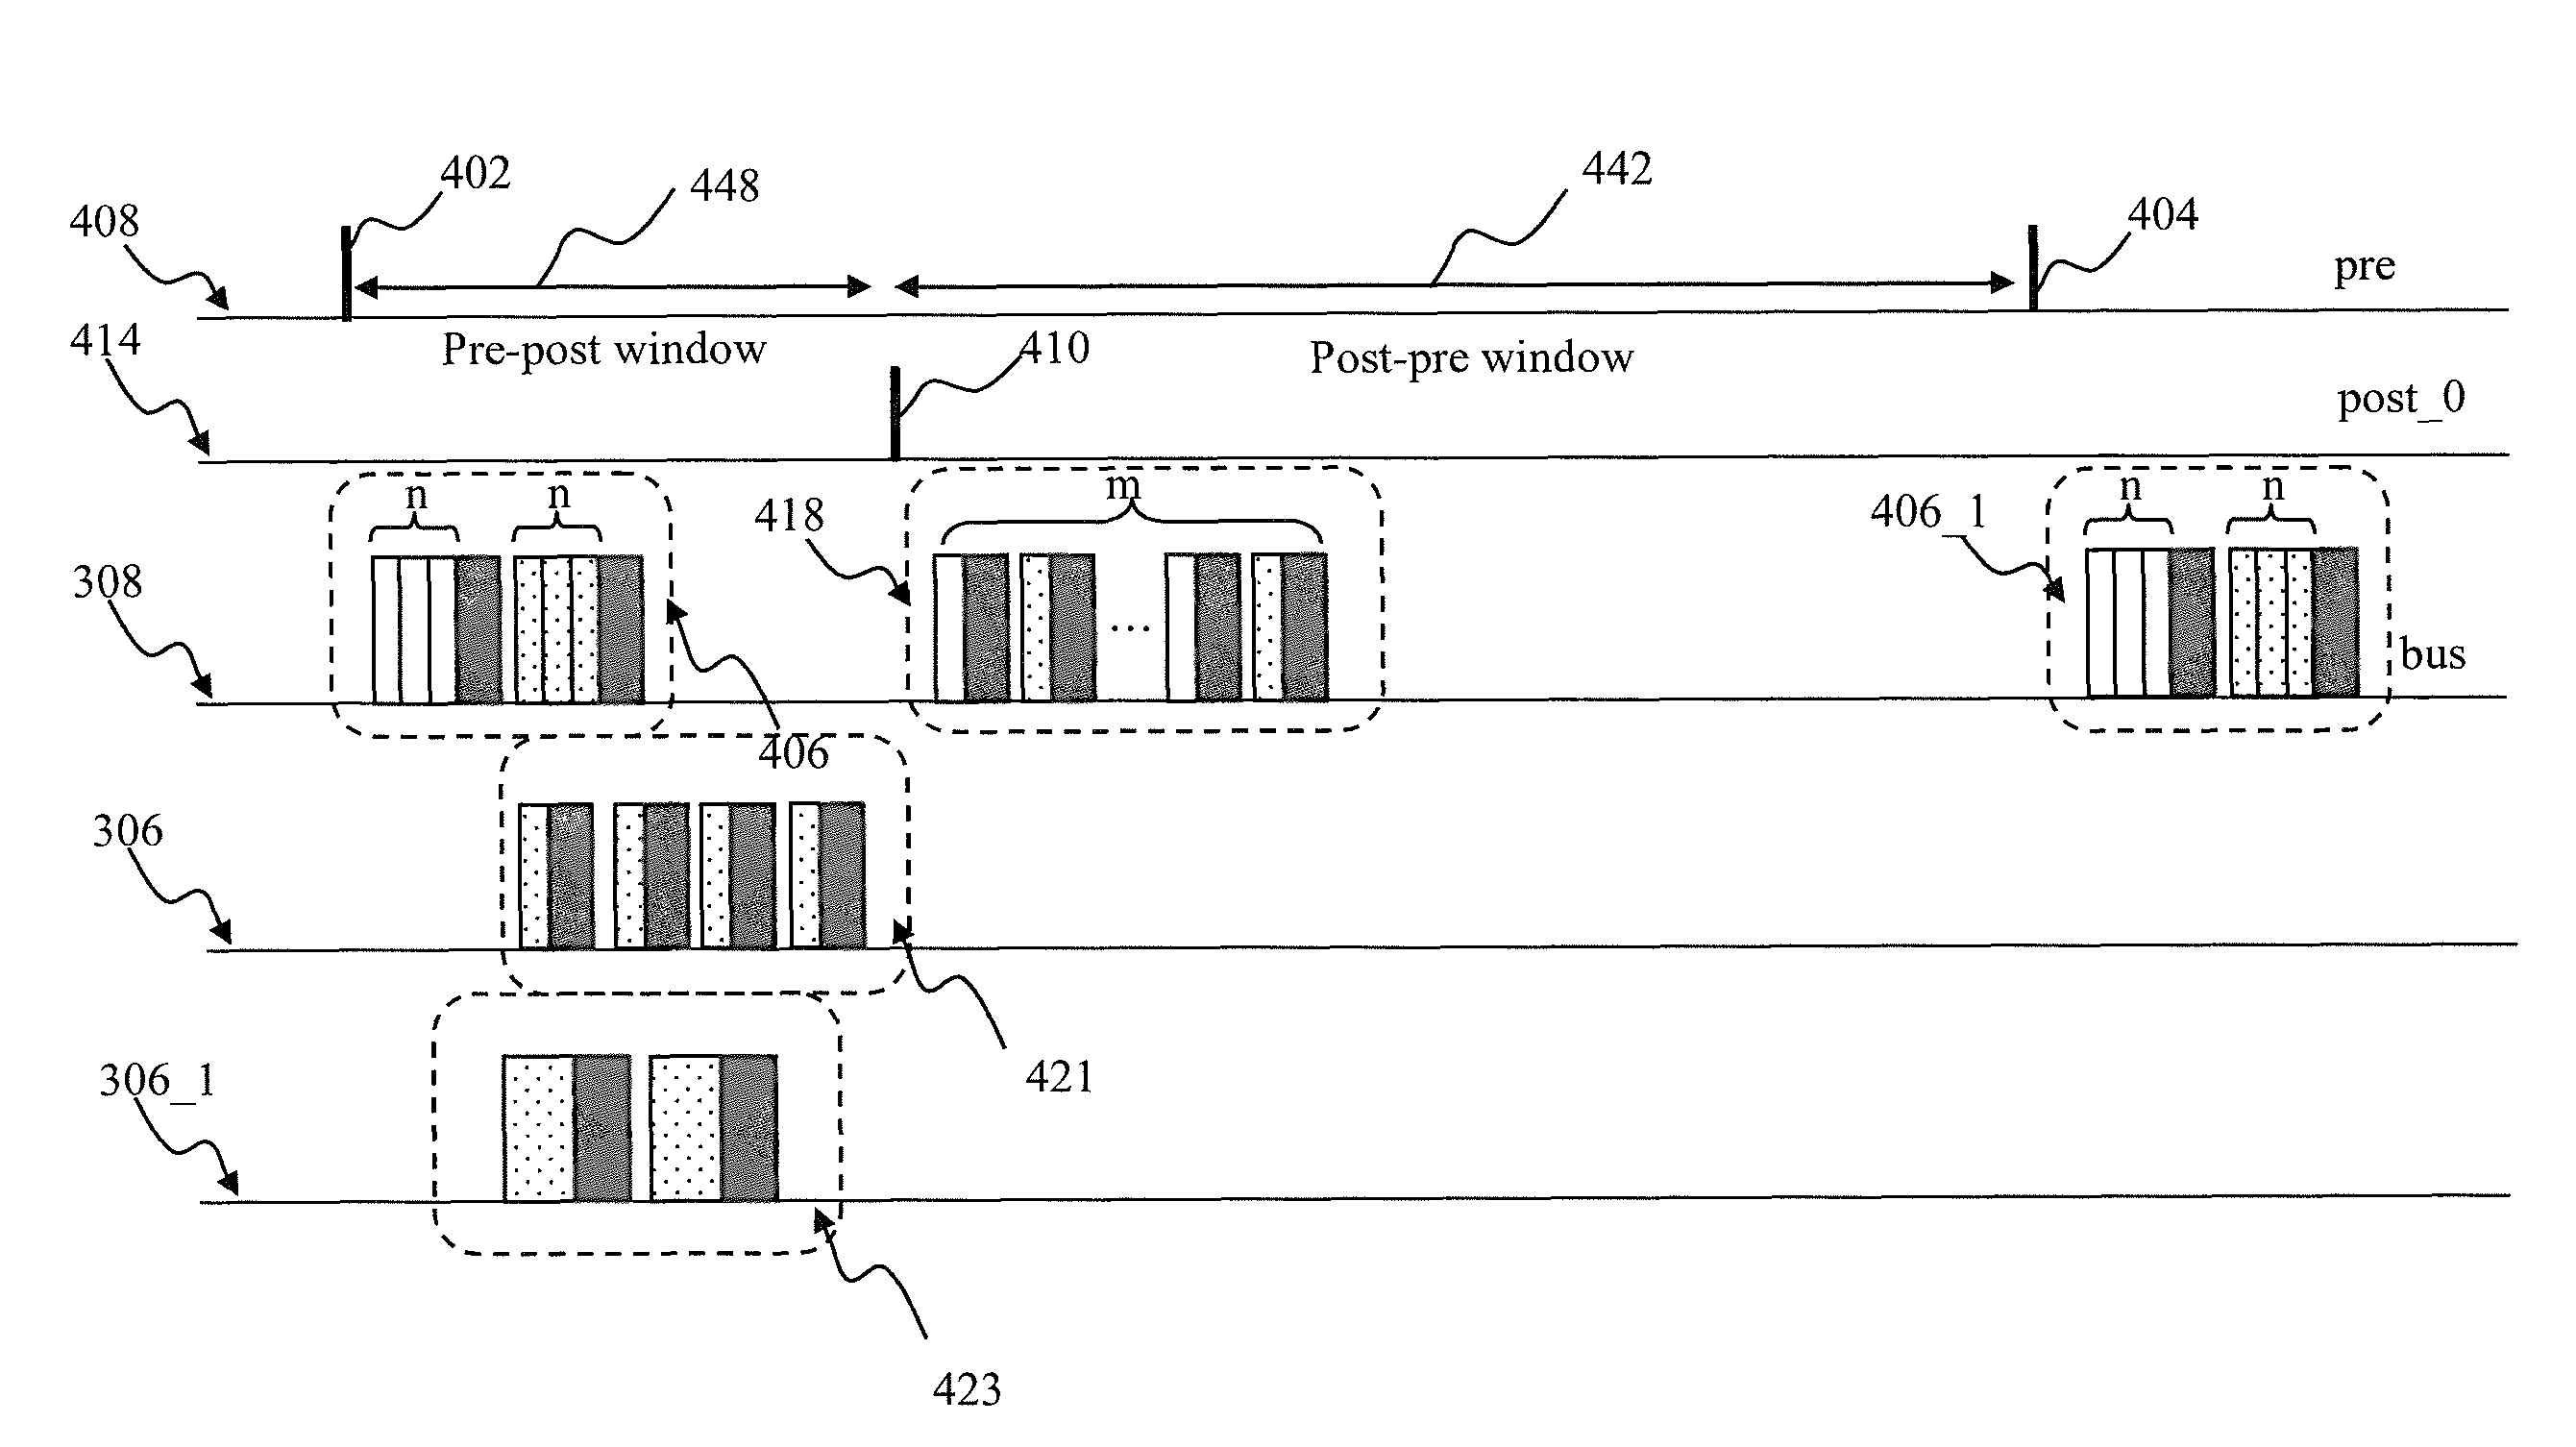 Apparatus and methods for synaptic update in a pulse-coded network